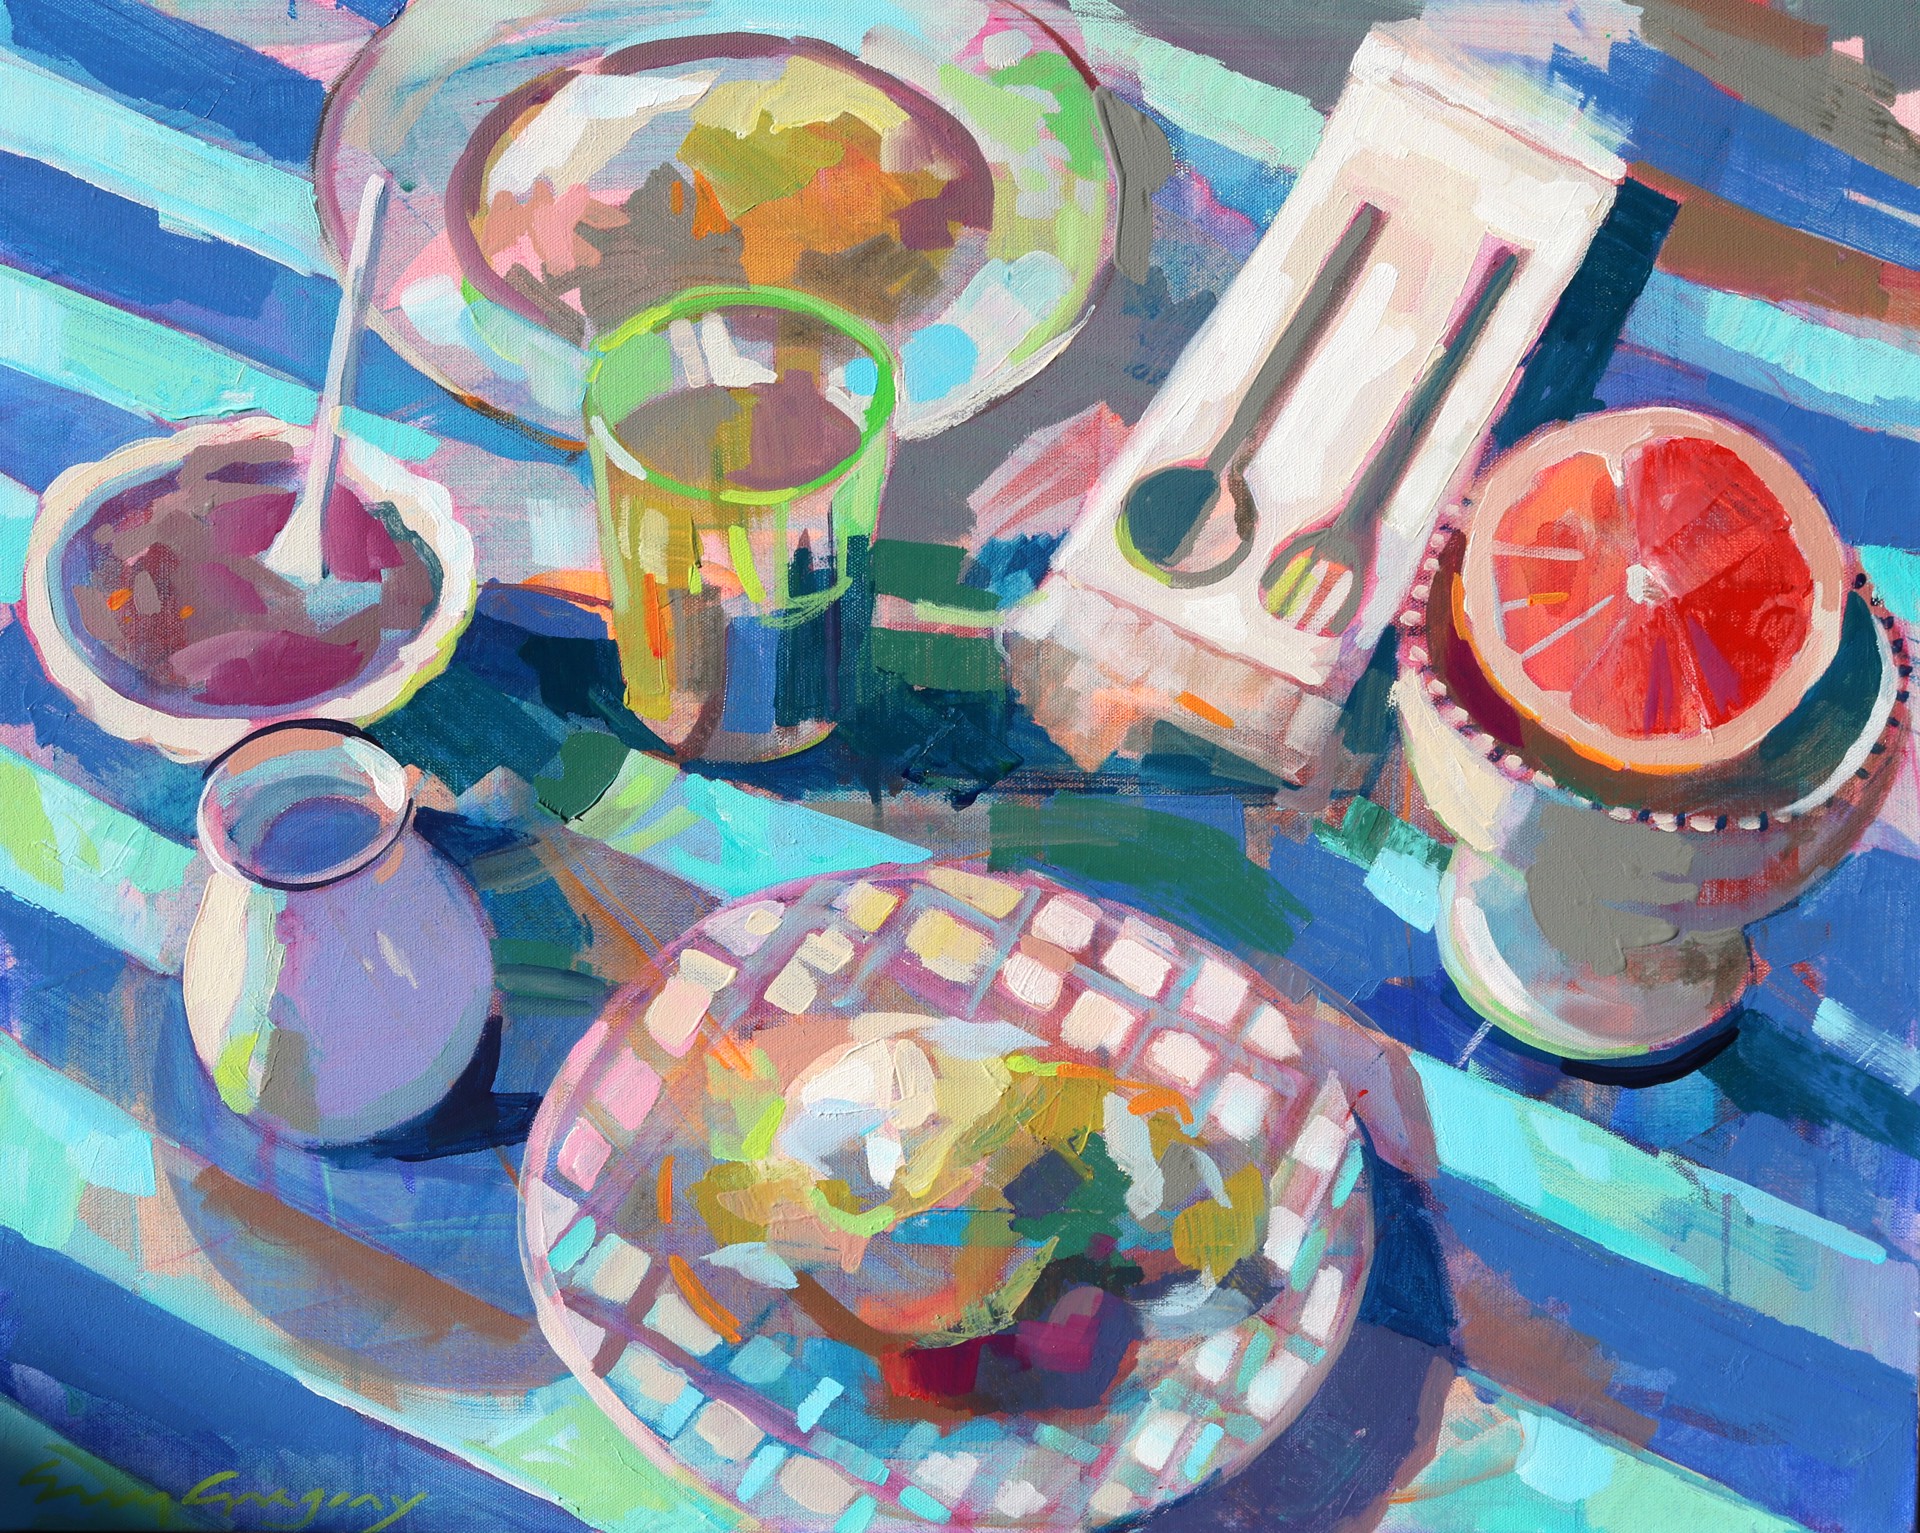 The Breakfast Table 5 by Erin Gregory